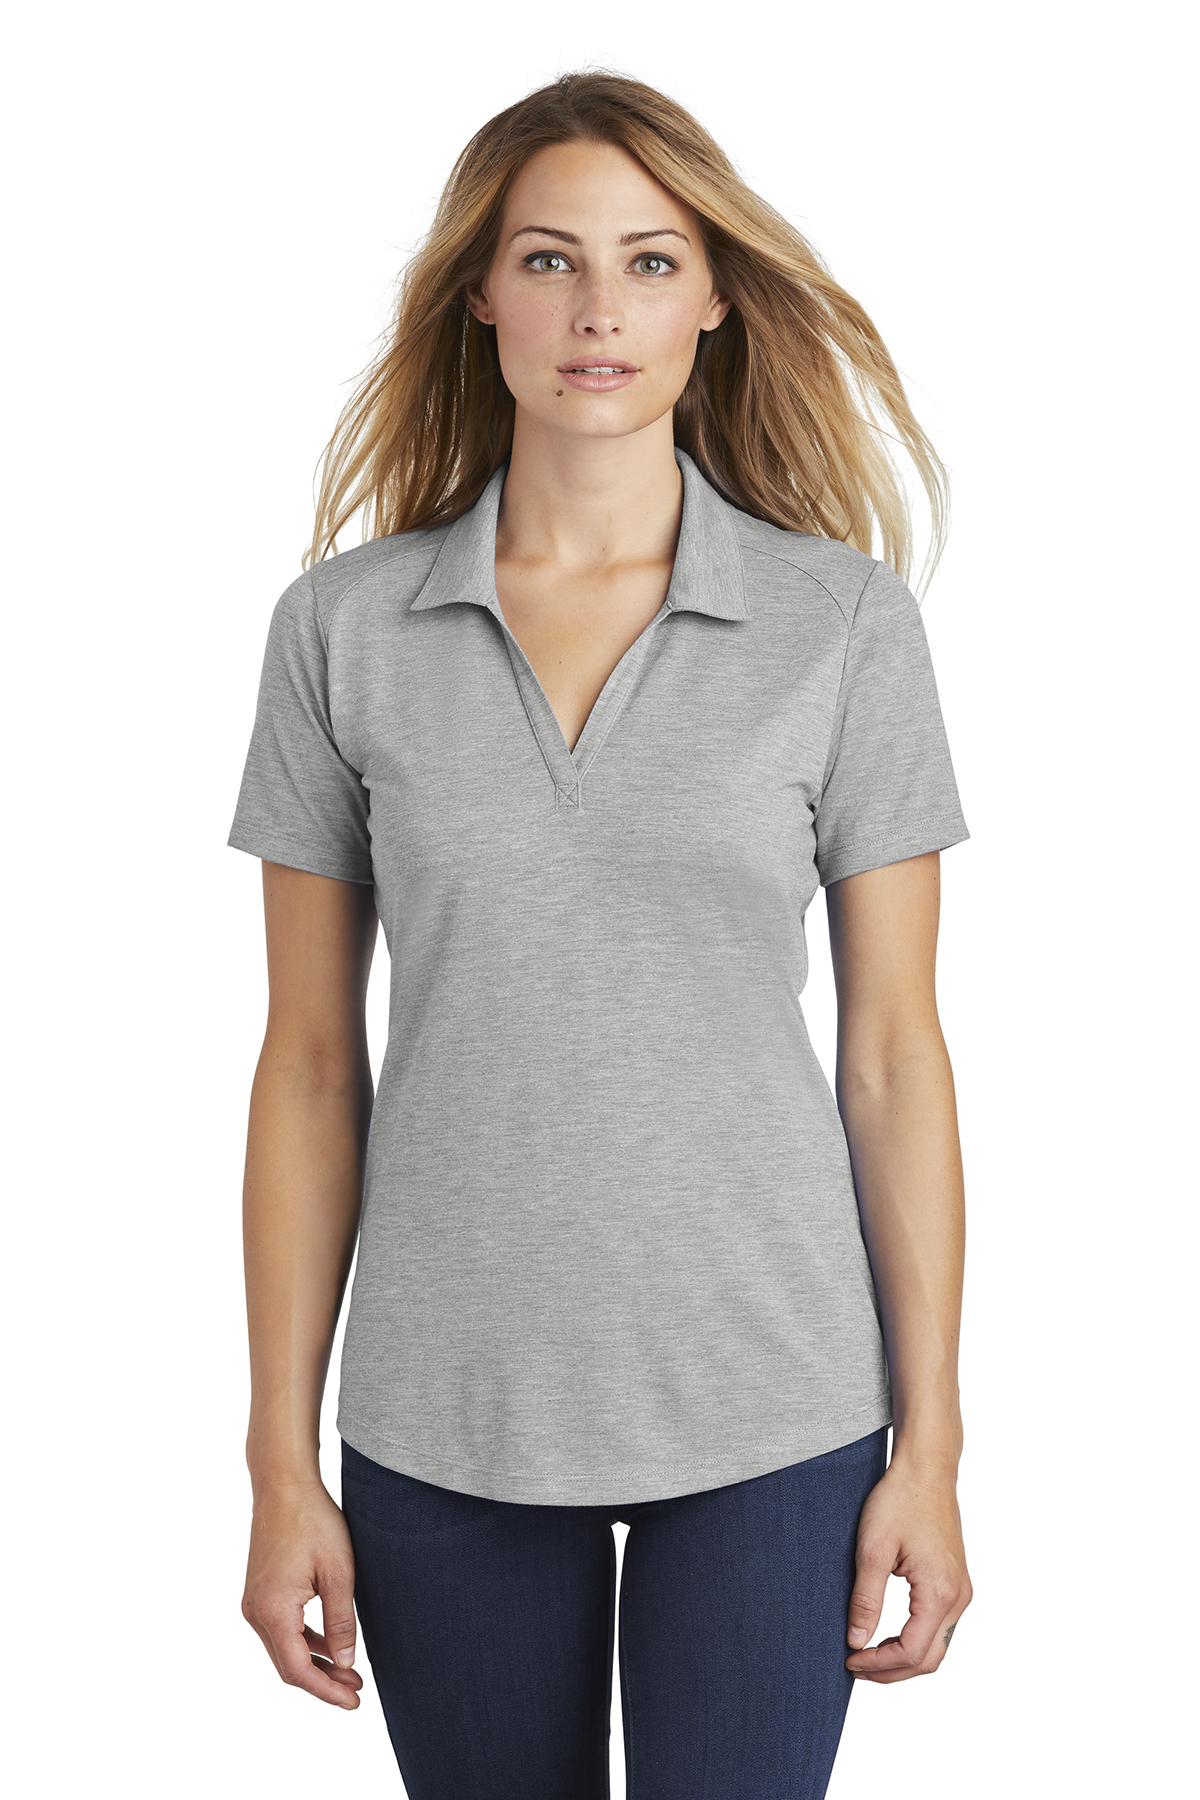 click to view Light Grey Heather